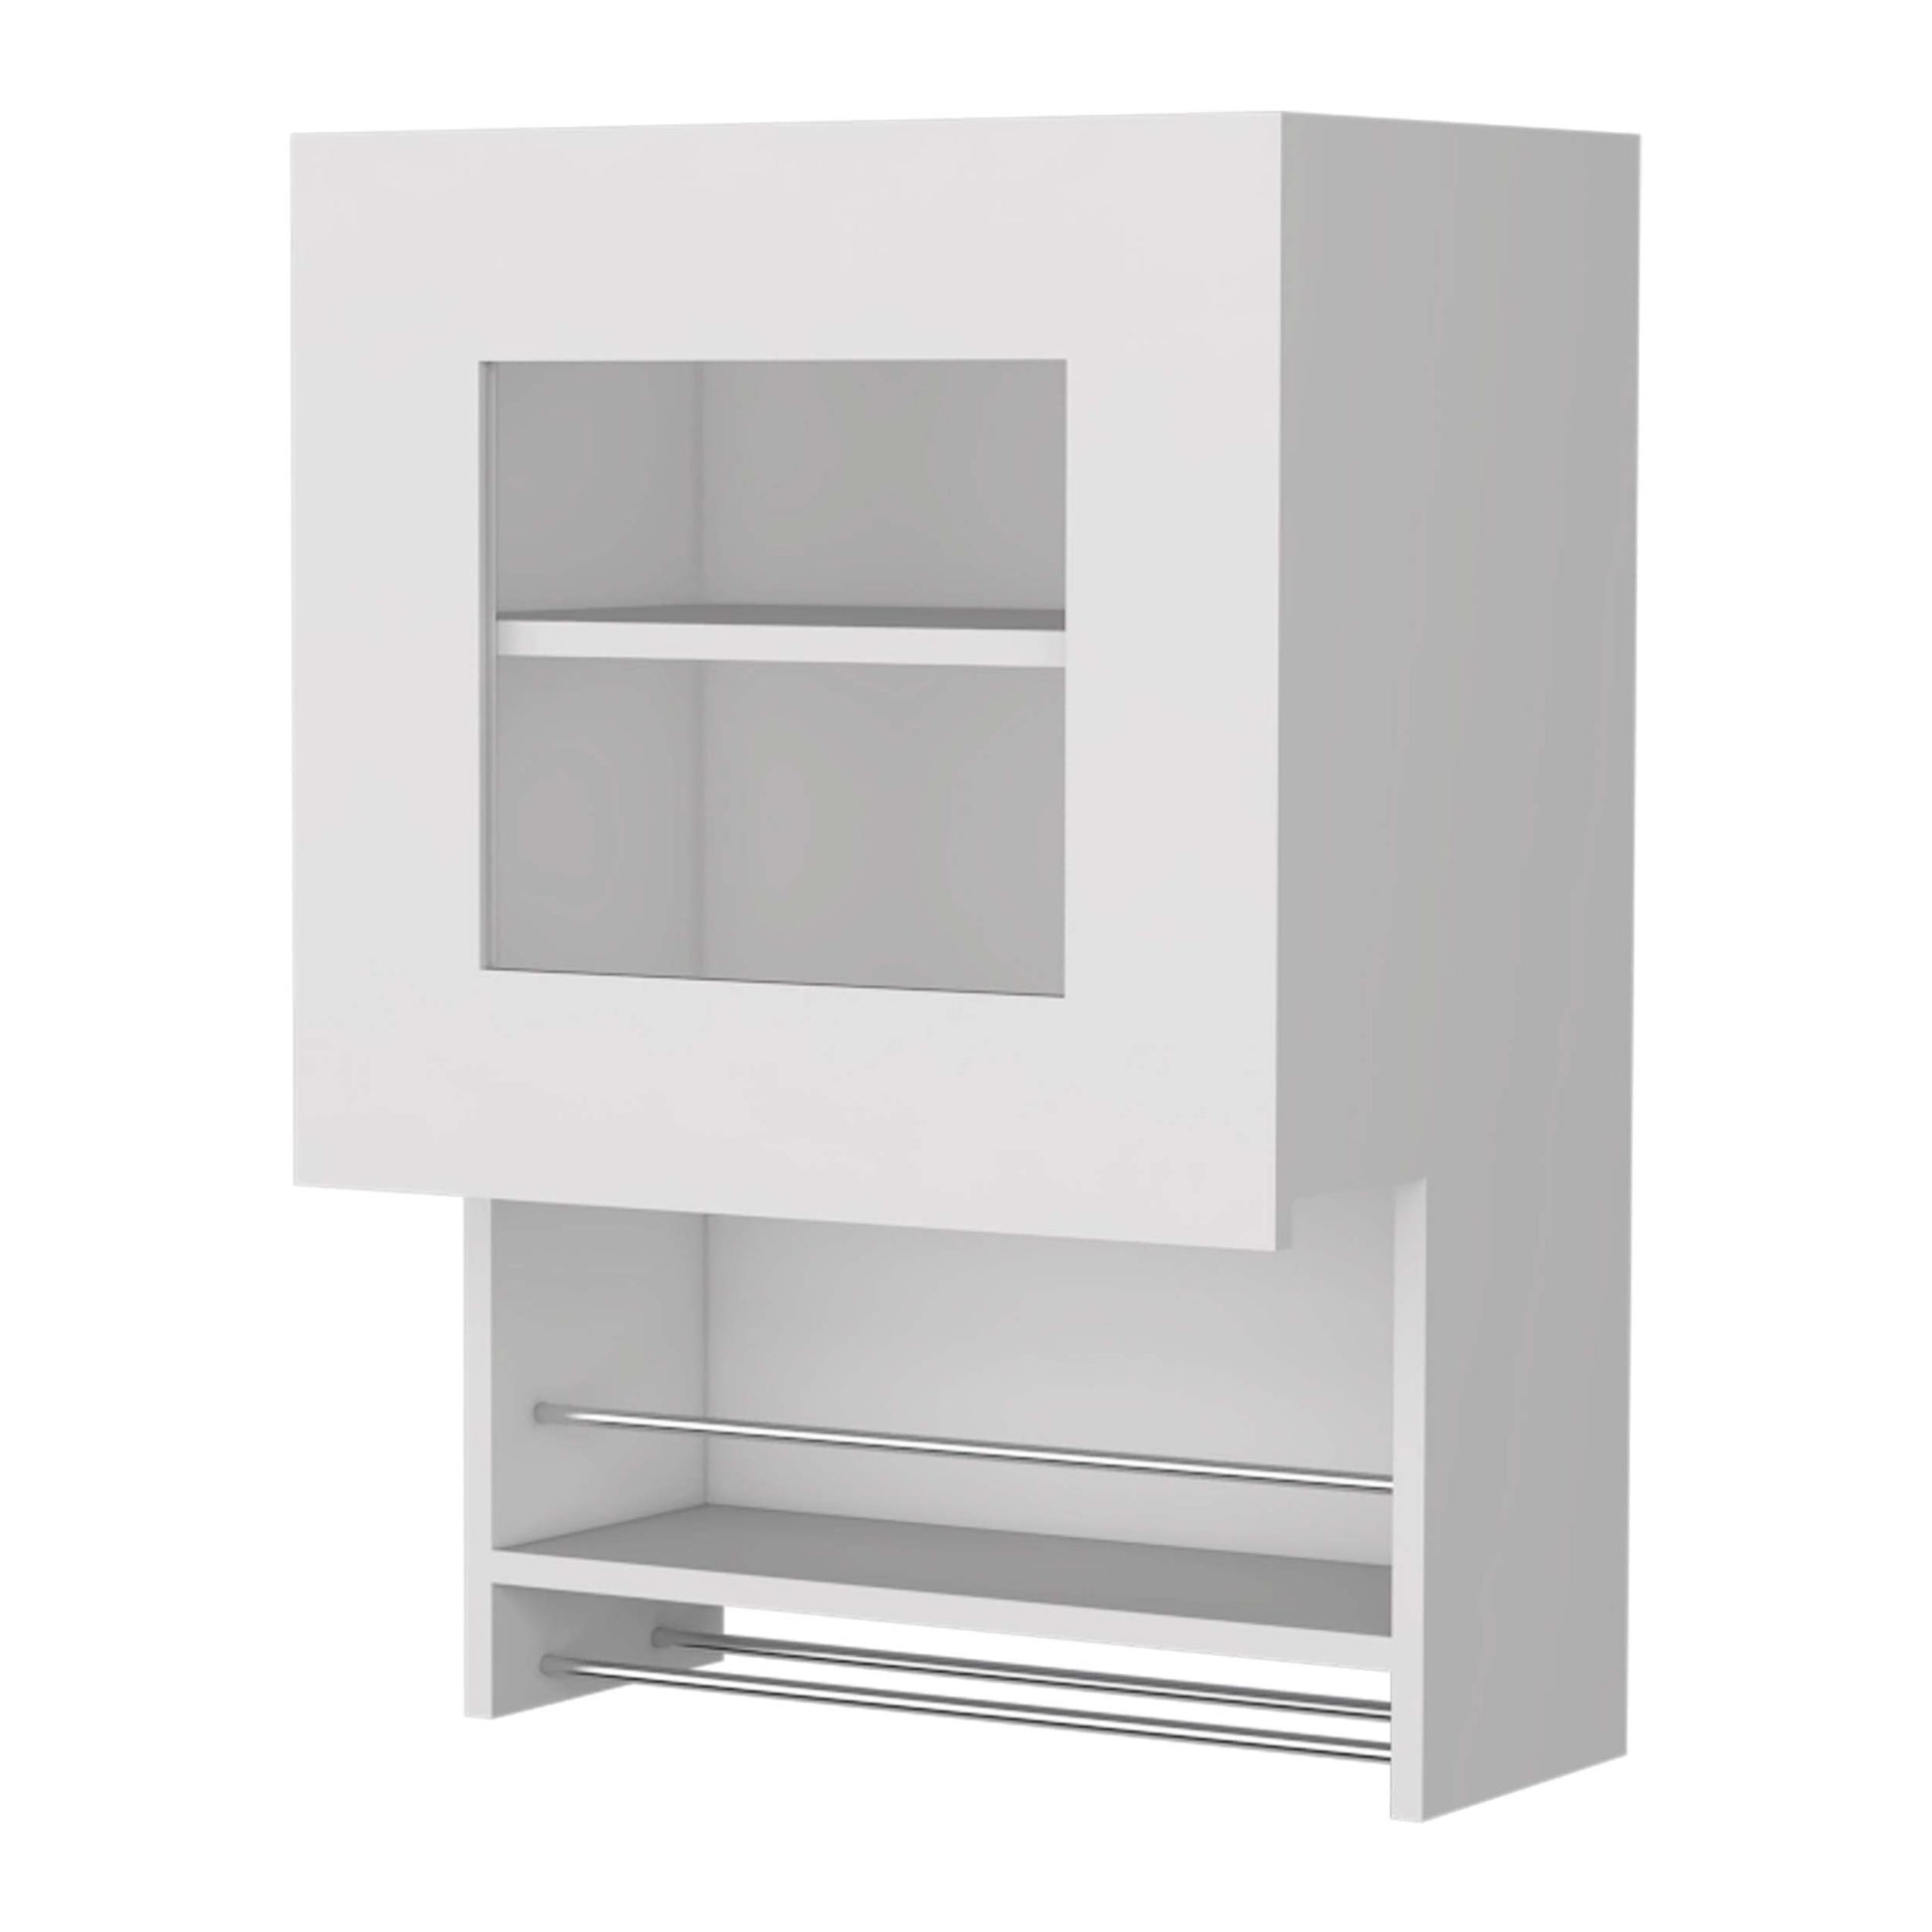 Florence Kitchen Wall Cabinet, Spice And Towel